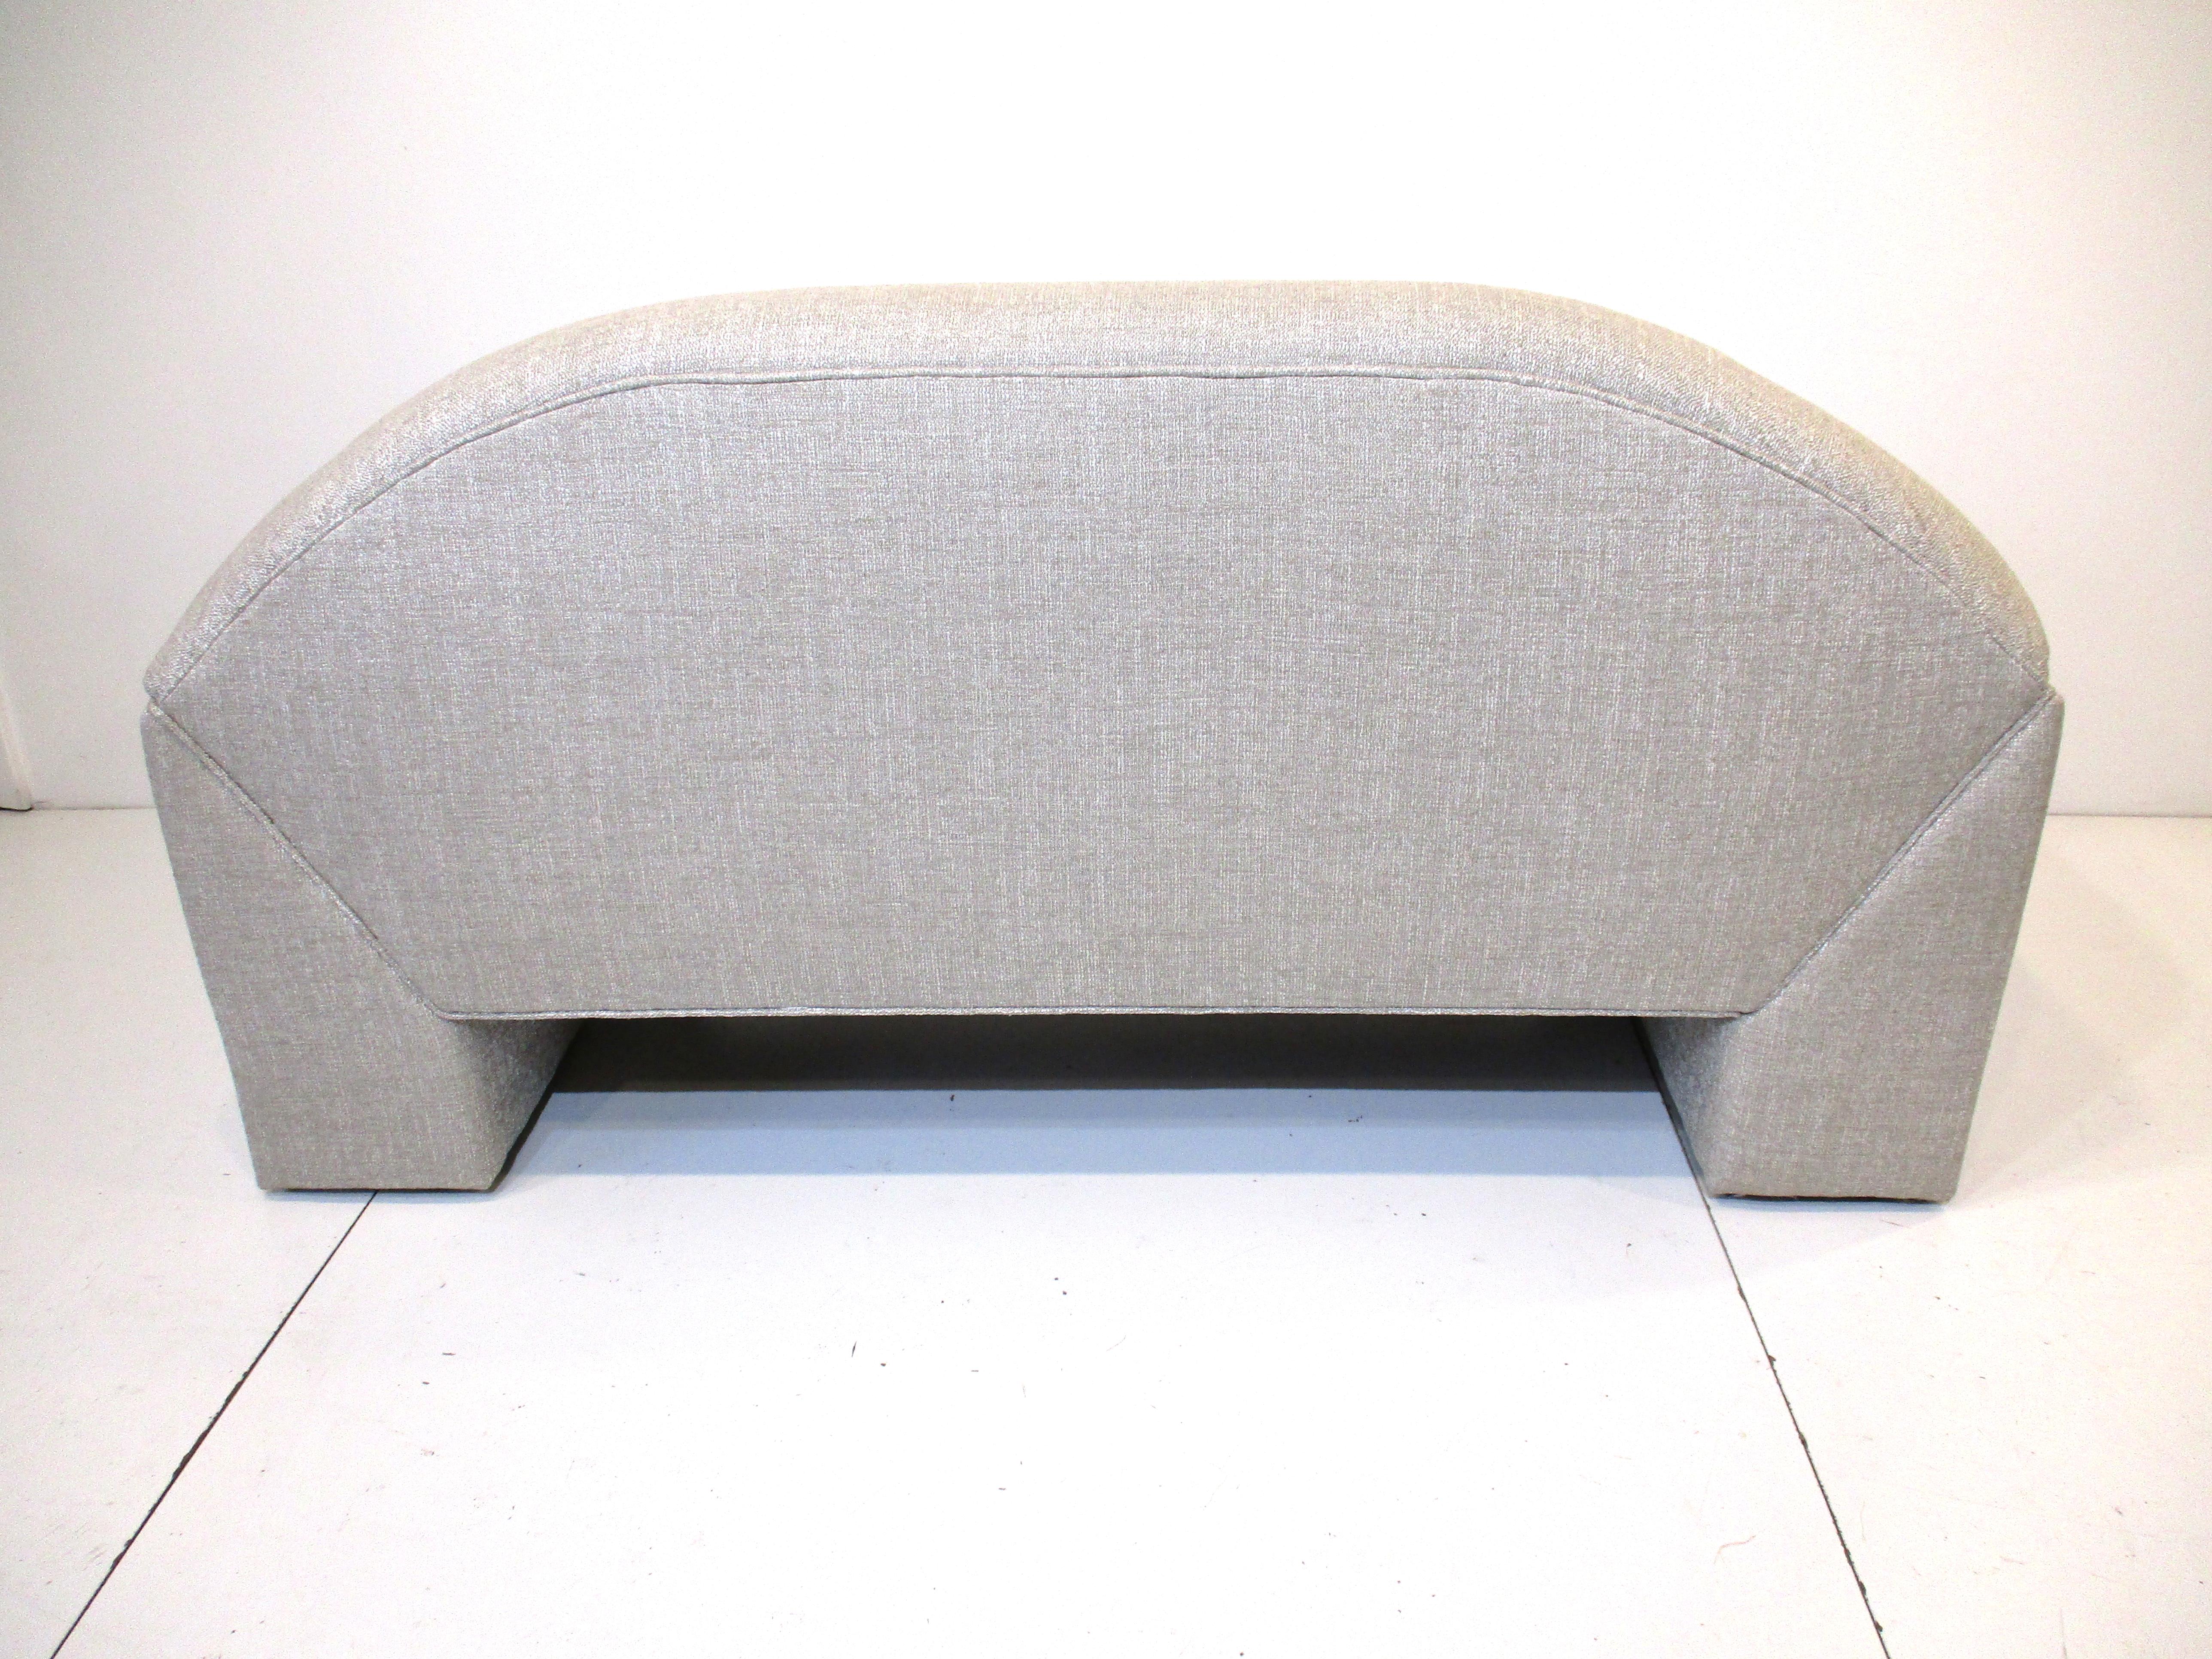 Upholstery Harvey Probber Mayan Styled Sofa for Probber Furniture Company